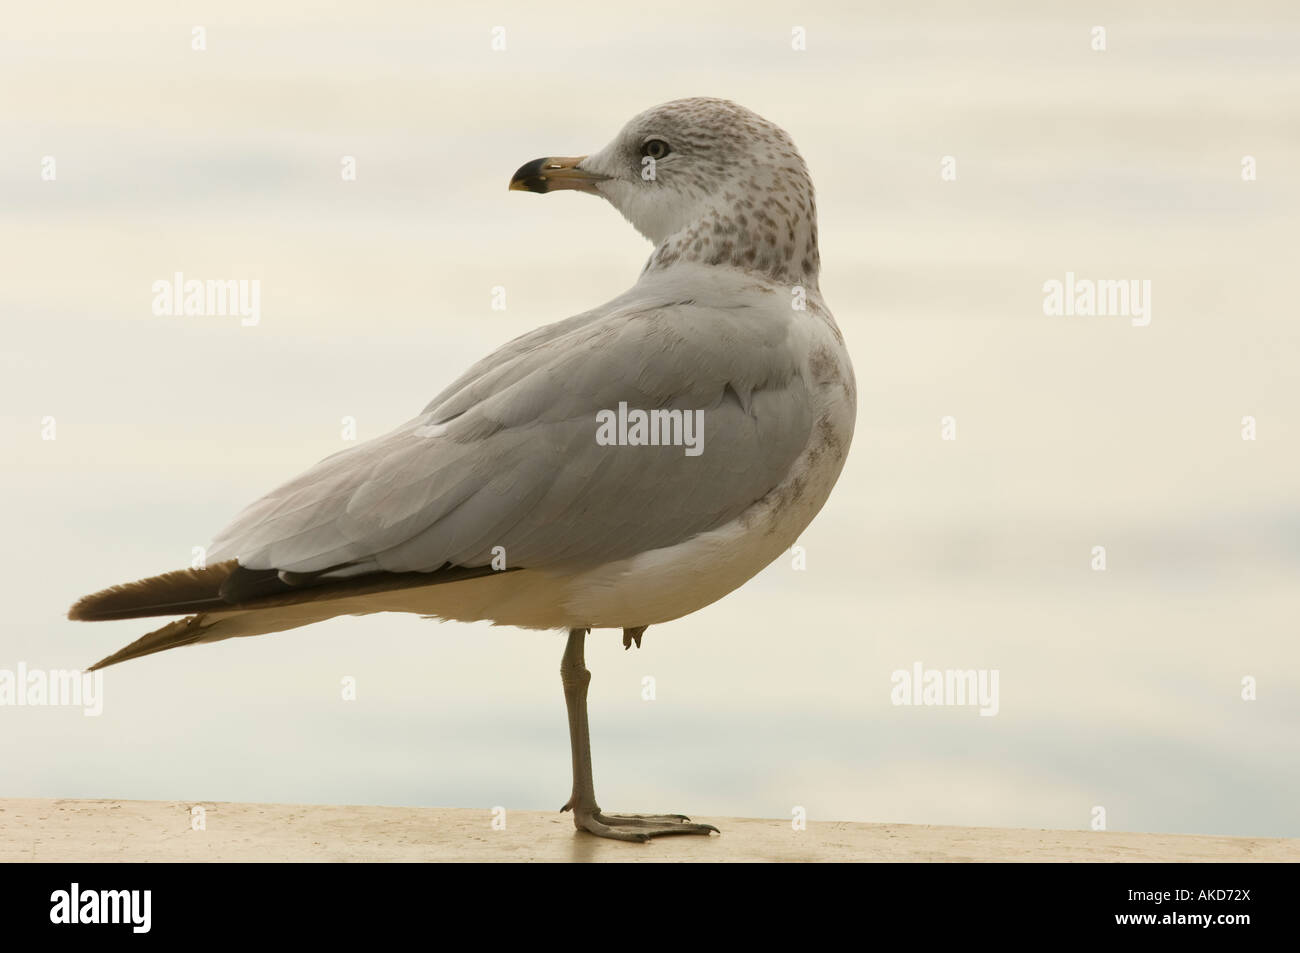 A SEAGULL STANDS ON ONE LEG NEAR LAKE SUPERIOR Stock Photo